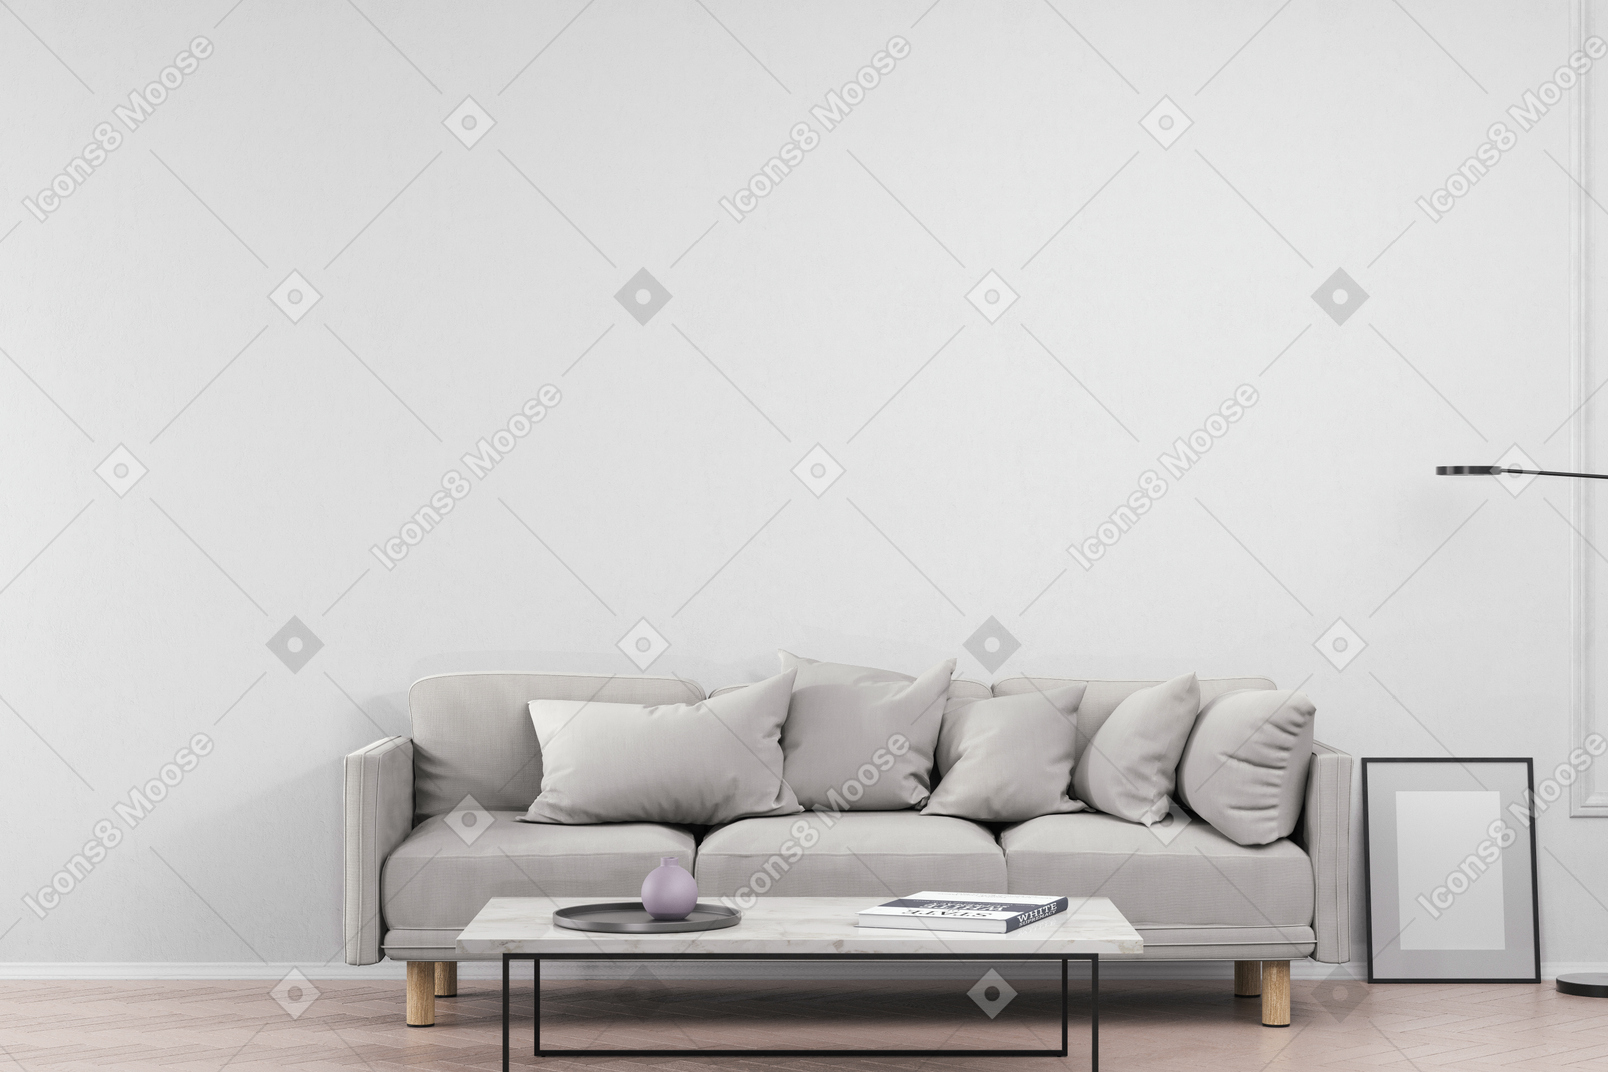 A cozy living room in grey colors, with a sofa and a coffee table in front of it